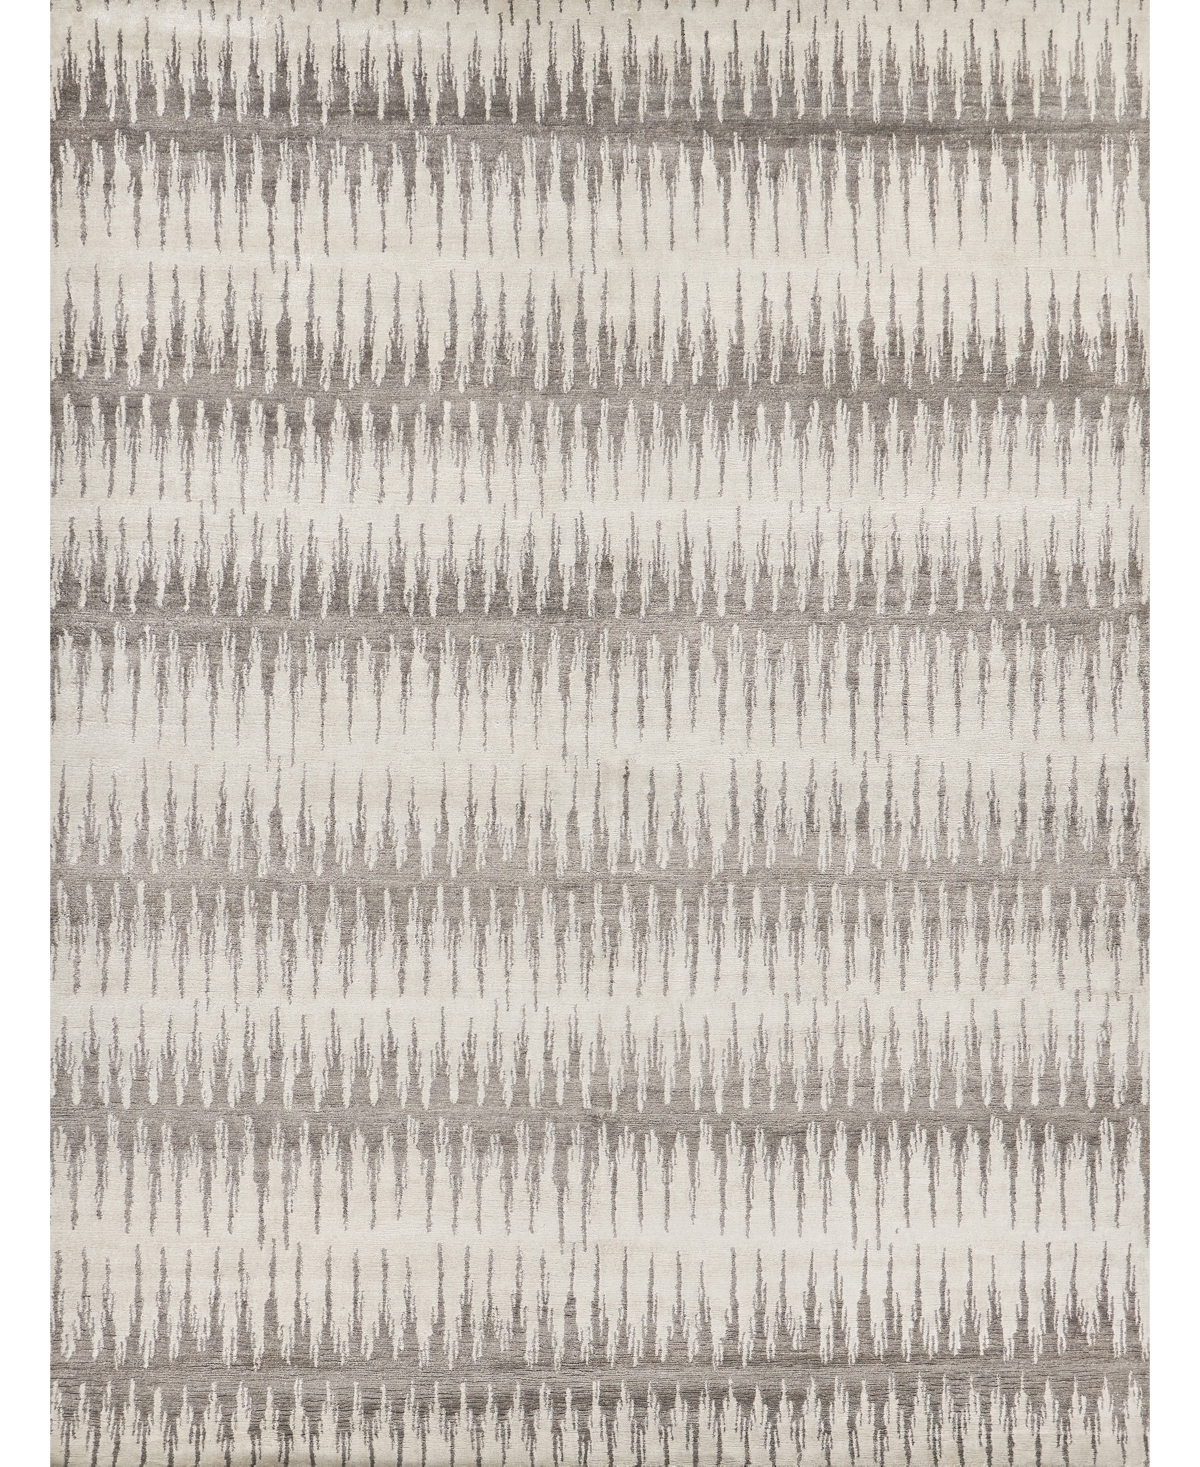 Exquisite Rugs Viscose From Bamboo Silk Er3288 8' X 10' Area Rug In Gray